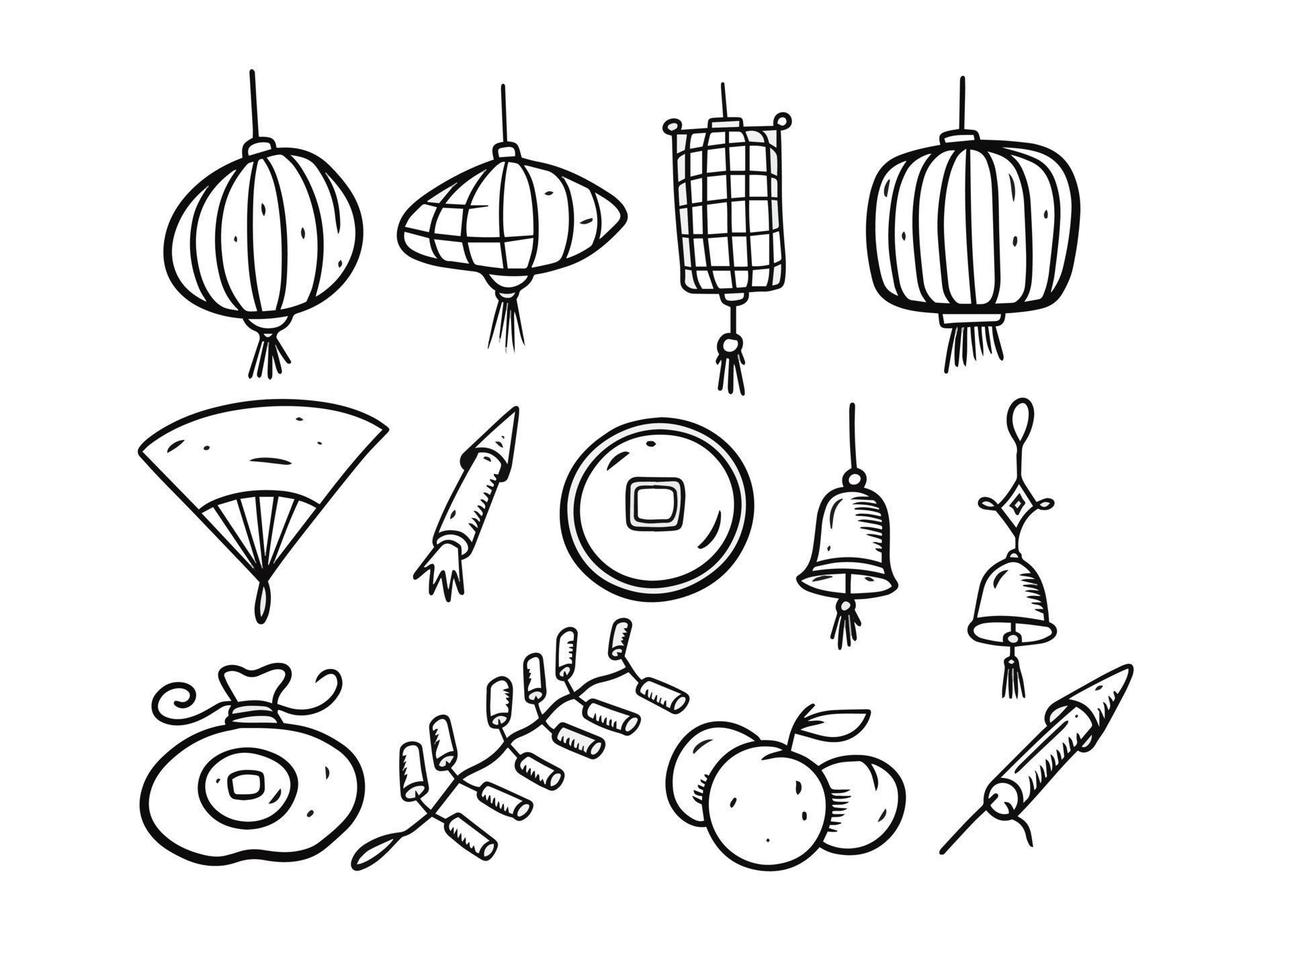 Chinese New Year illustration set. Black and white colors. vector